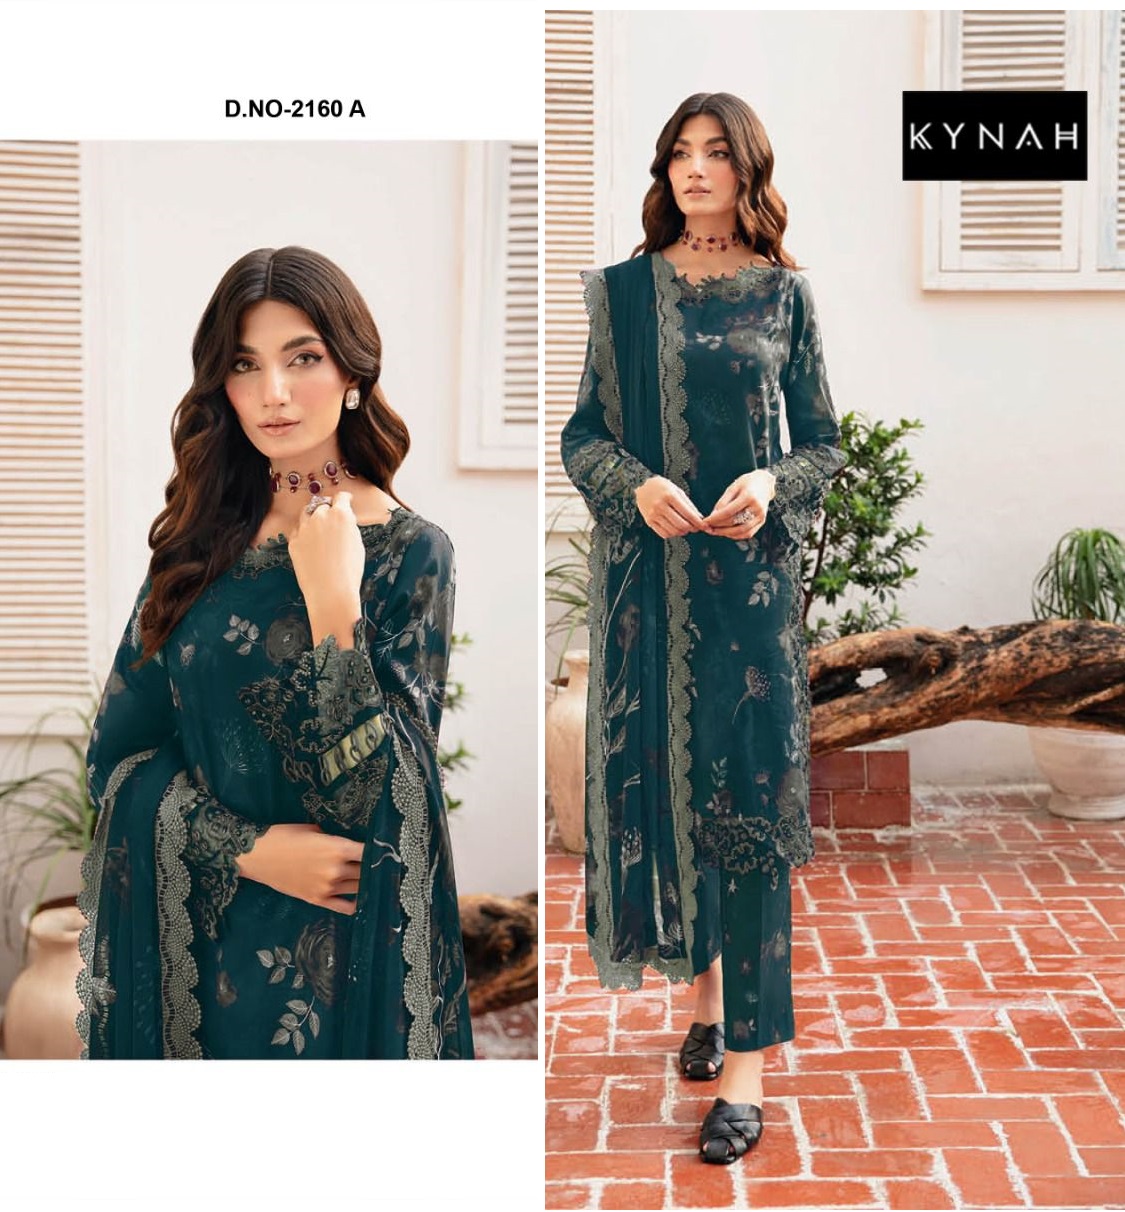 KYNAH 2160 A PAKISTANI SALWAR SUITS IN INDIA